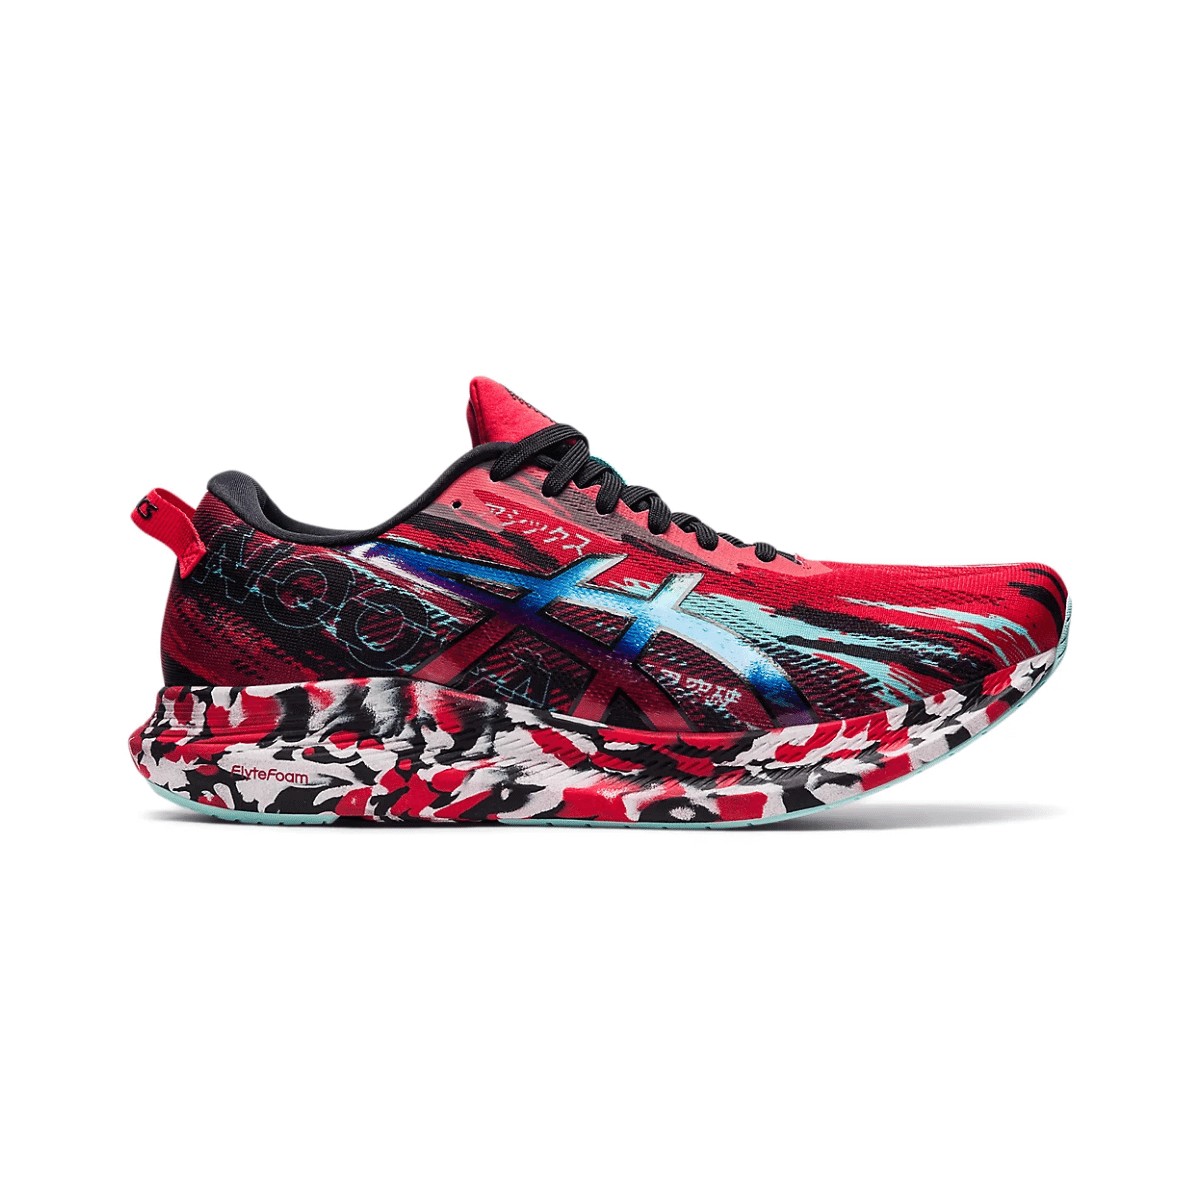 Asics Noosa Tri 13 Running Shoes Electric Red Black, Size 45 - EUR